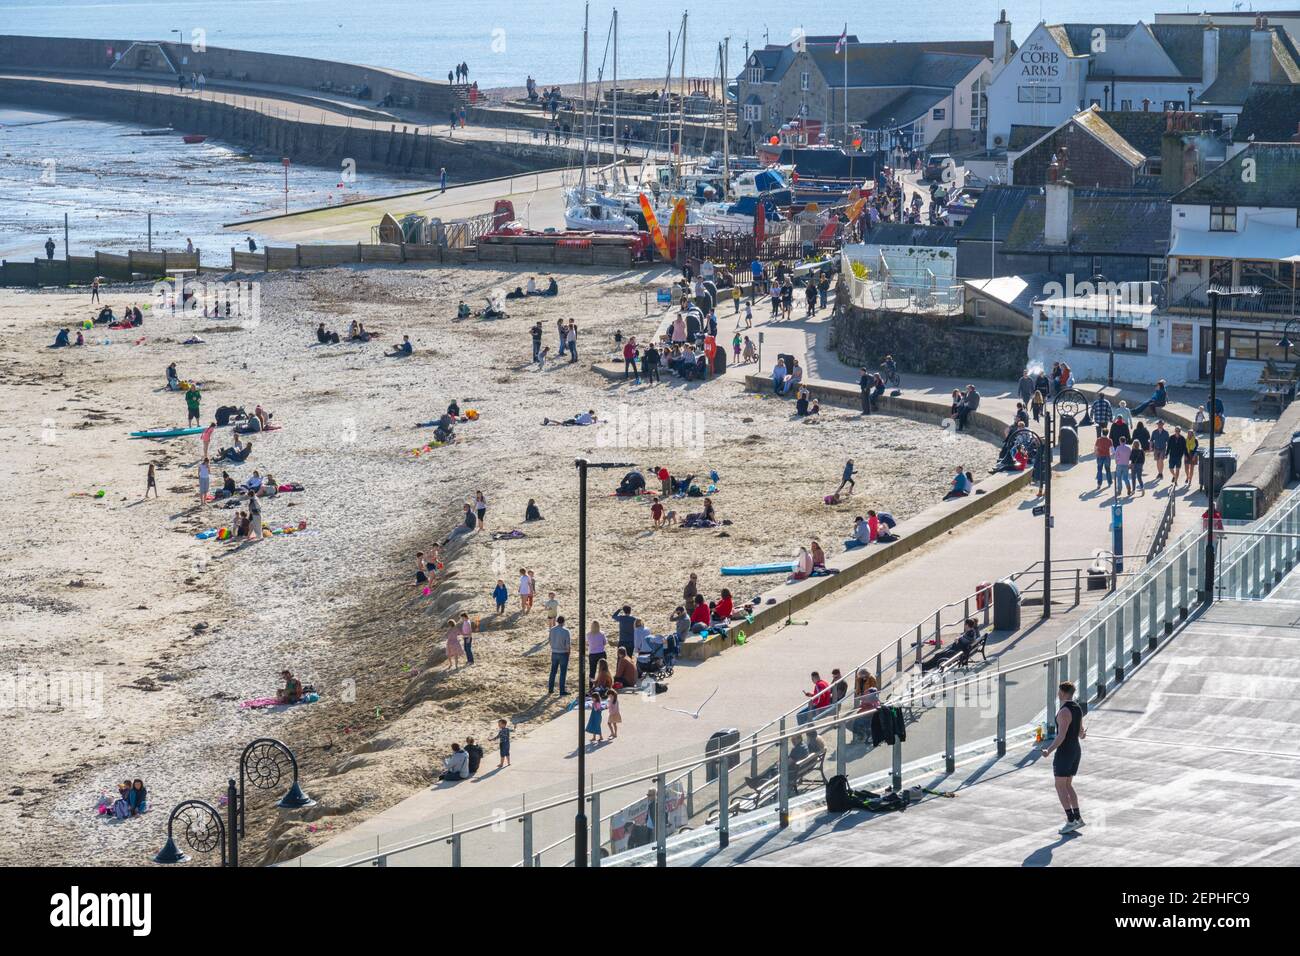 Lyme Regis, Dorset, UK. 27th Feb, 2021. UK Weather: Plenty of people were out and about enjoying unseasonably warm and sunny weather at the seaside resort of Lyme Regis this afternoon. Credit: Celia McMahon/Alamy Live News Stock Photo